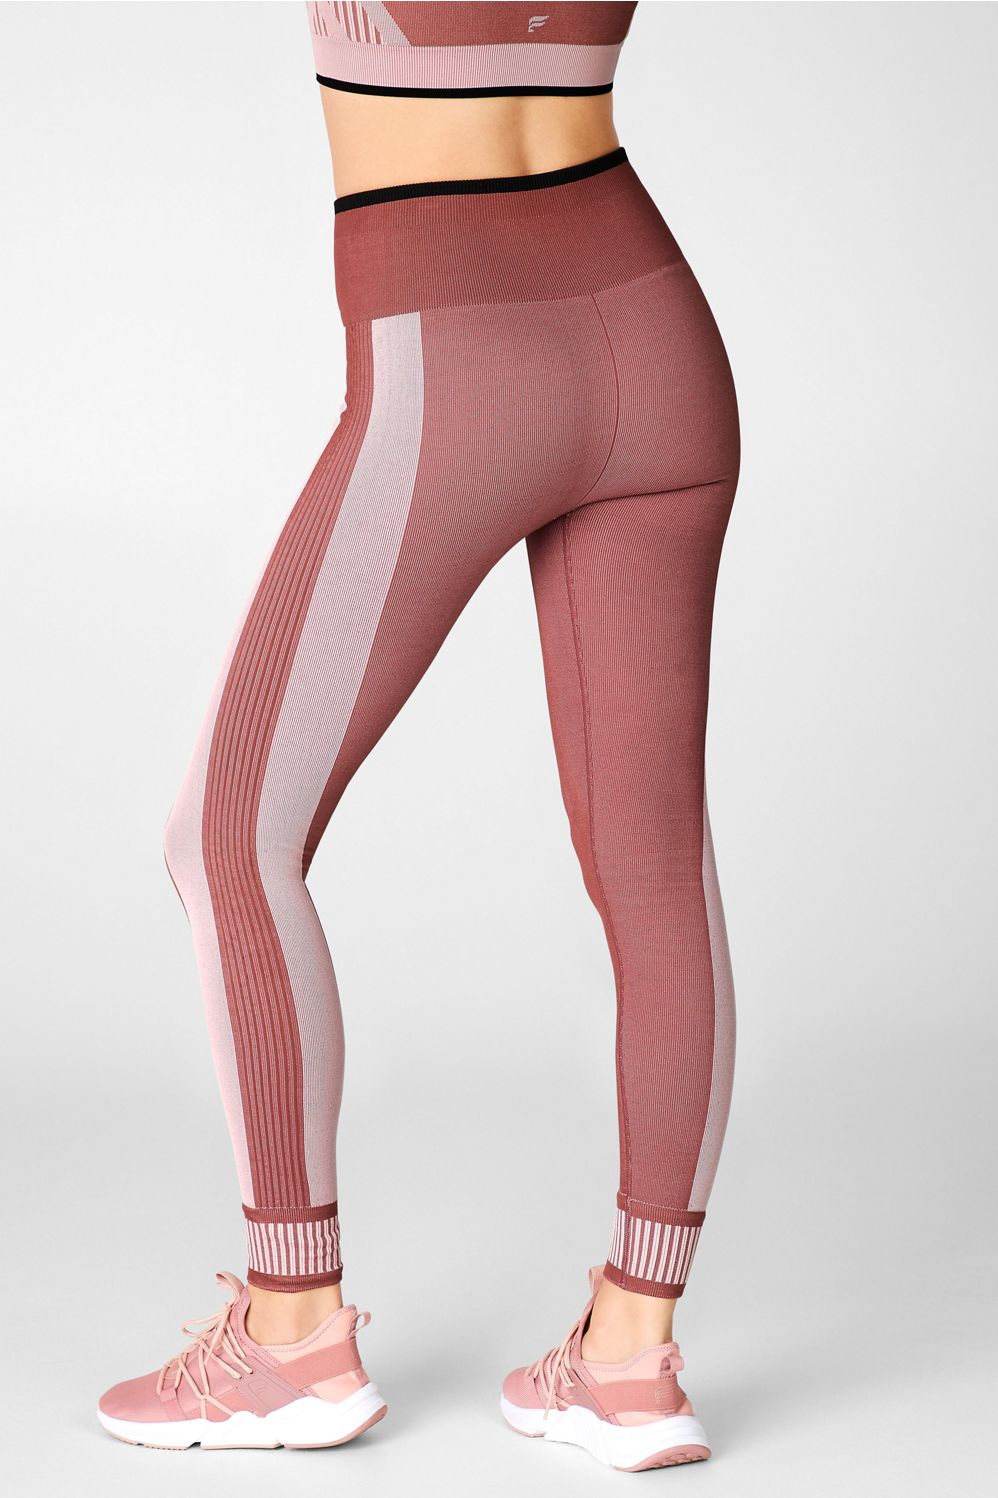 Women's Seamless High-Rise Leggings - All in Motion Clay Pink M